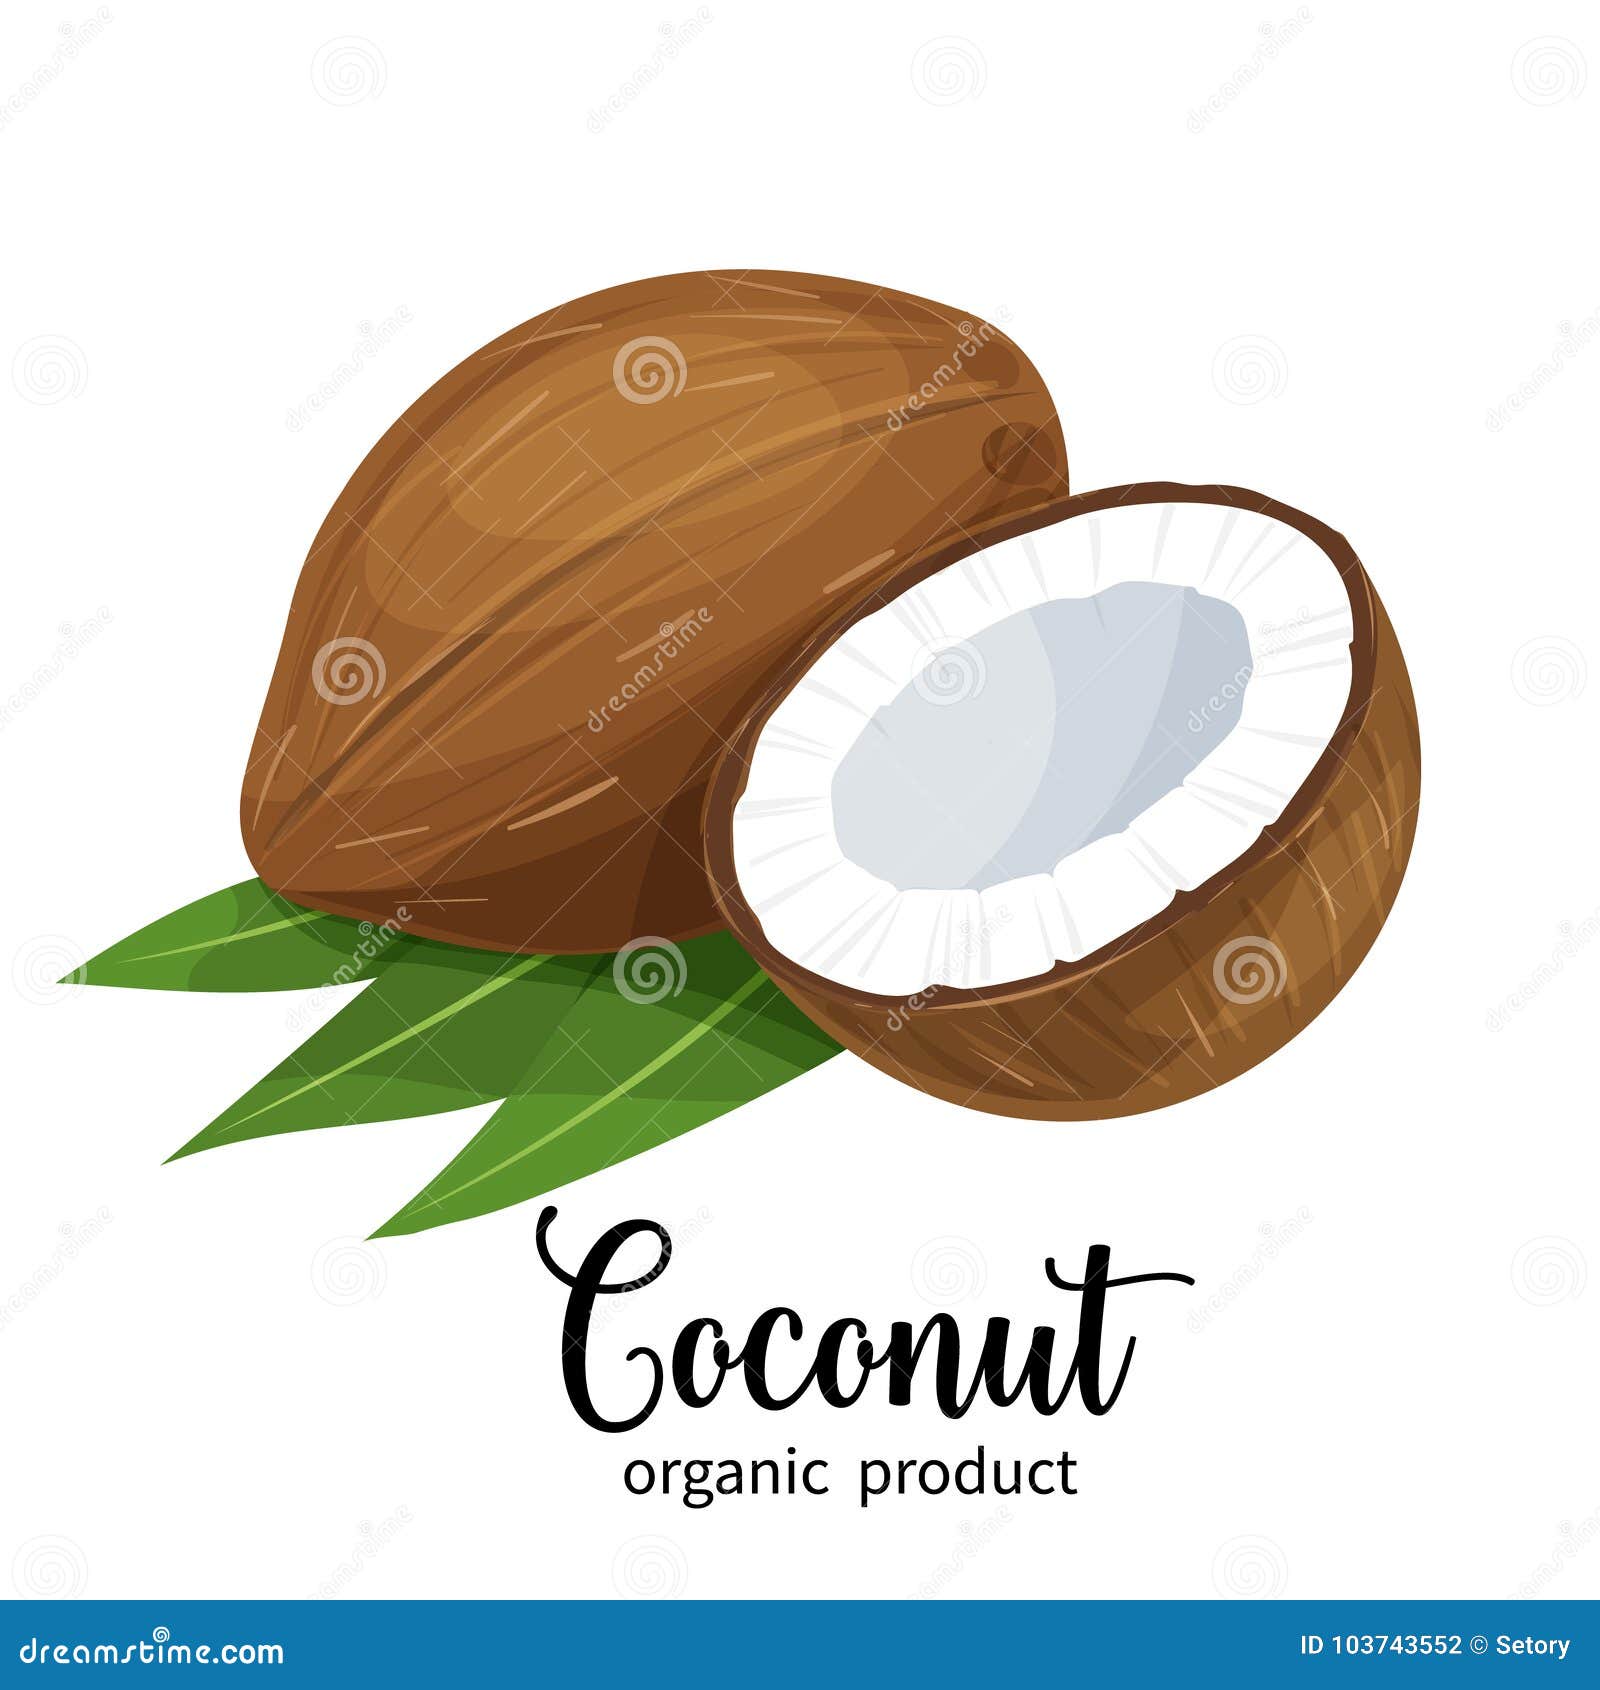 Coconut in cartoon style stock vector. Illustration of coco - 103743552